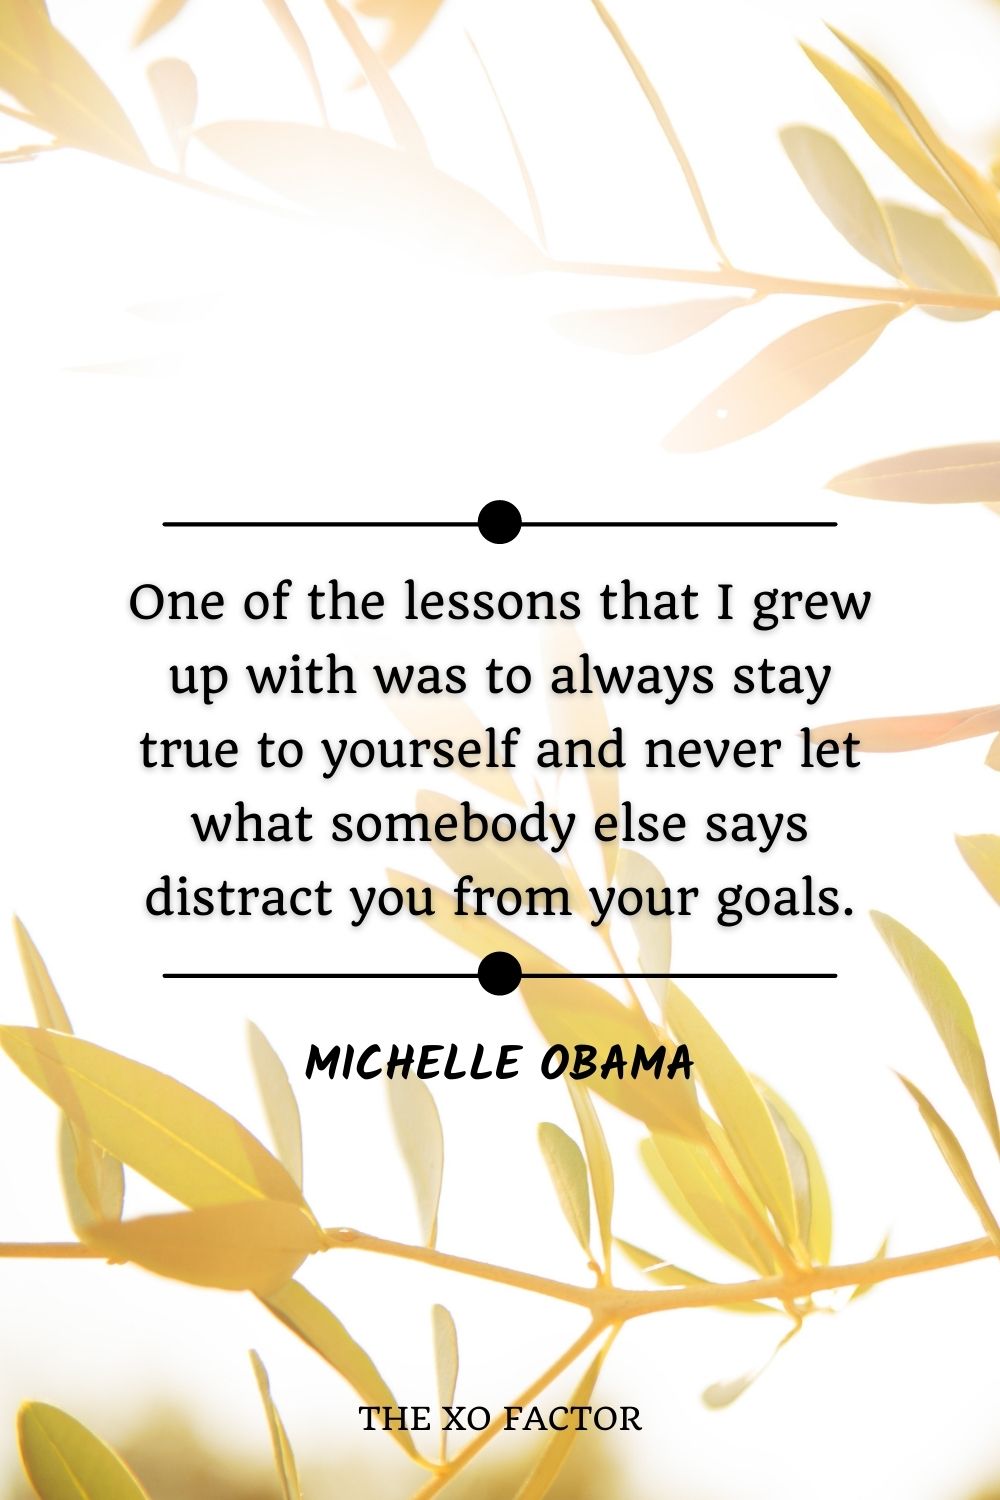 One of the lessons that I grew up with was to always stay true to yourself and never let what somebody else says distract you from your goals.” – Michelle Obama